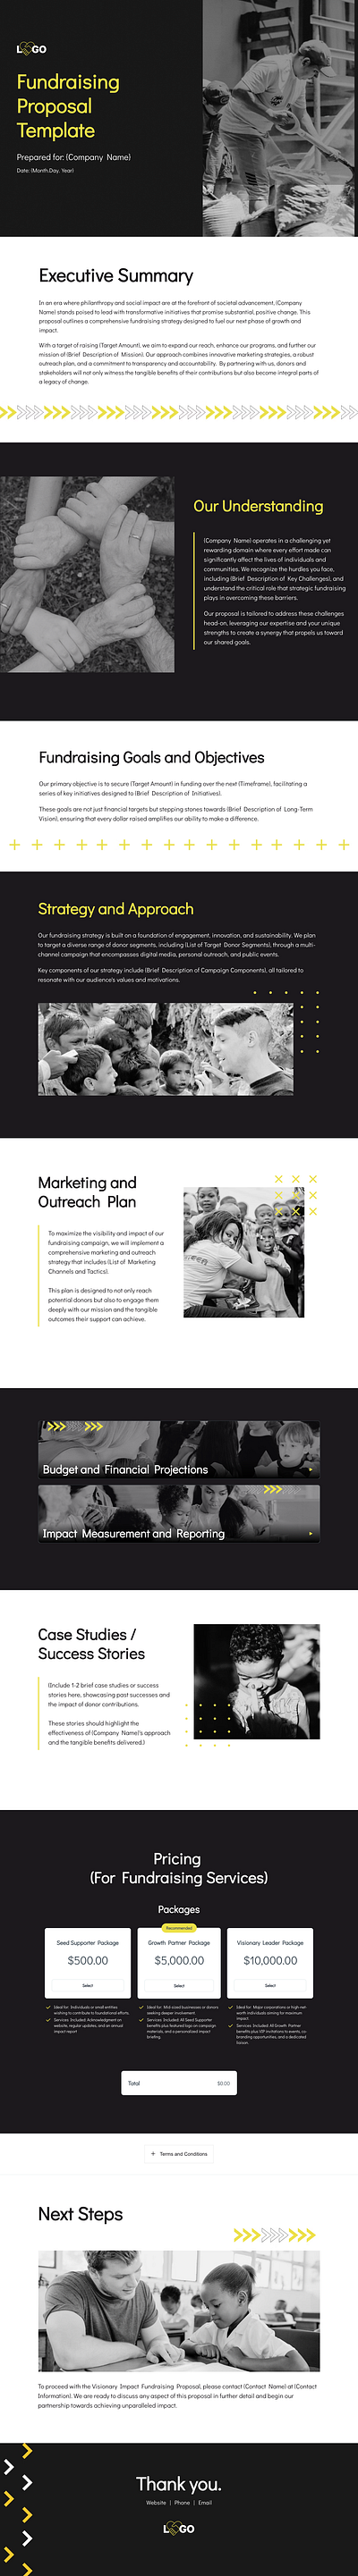 Template Proposal - Fundraising design landing page proposal template